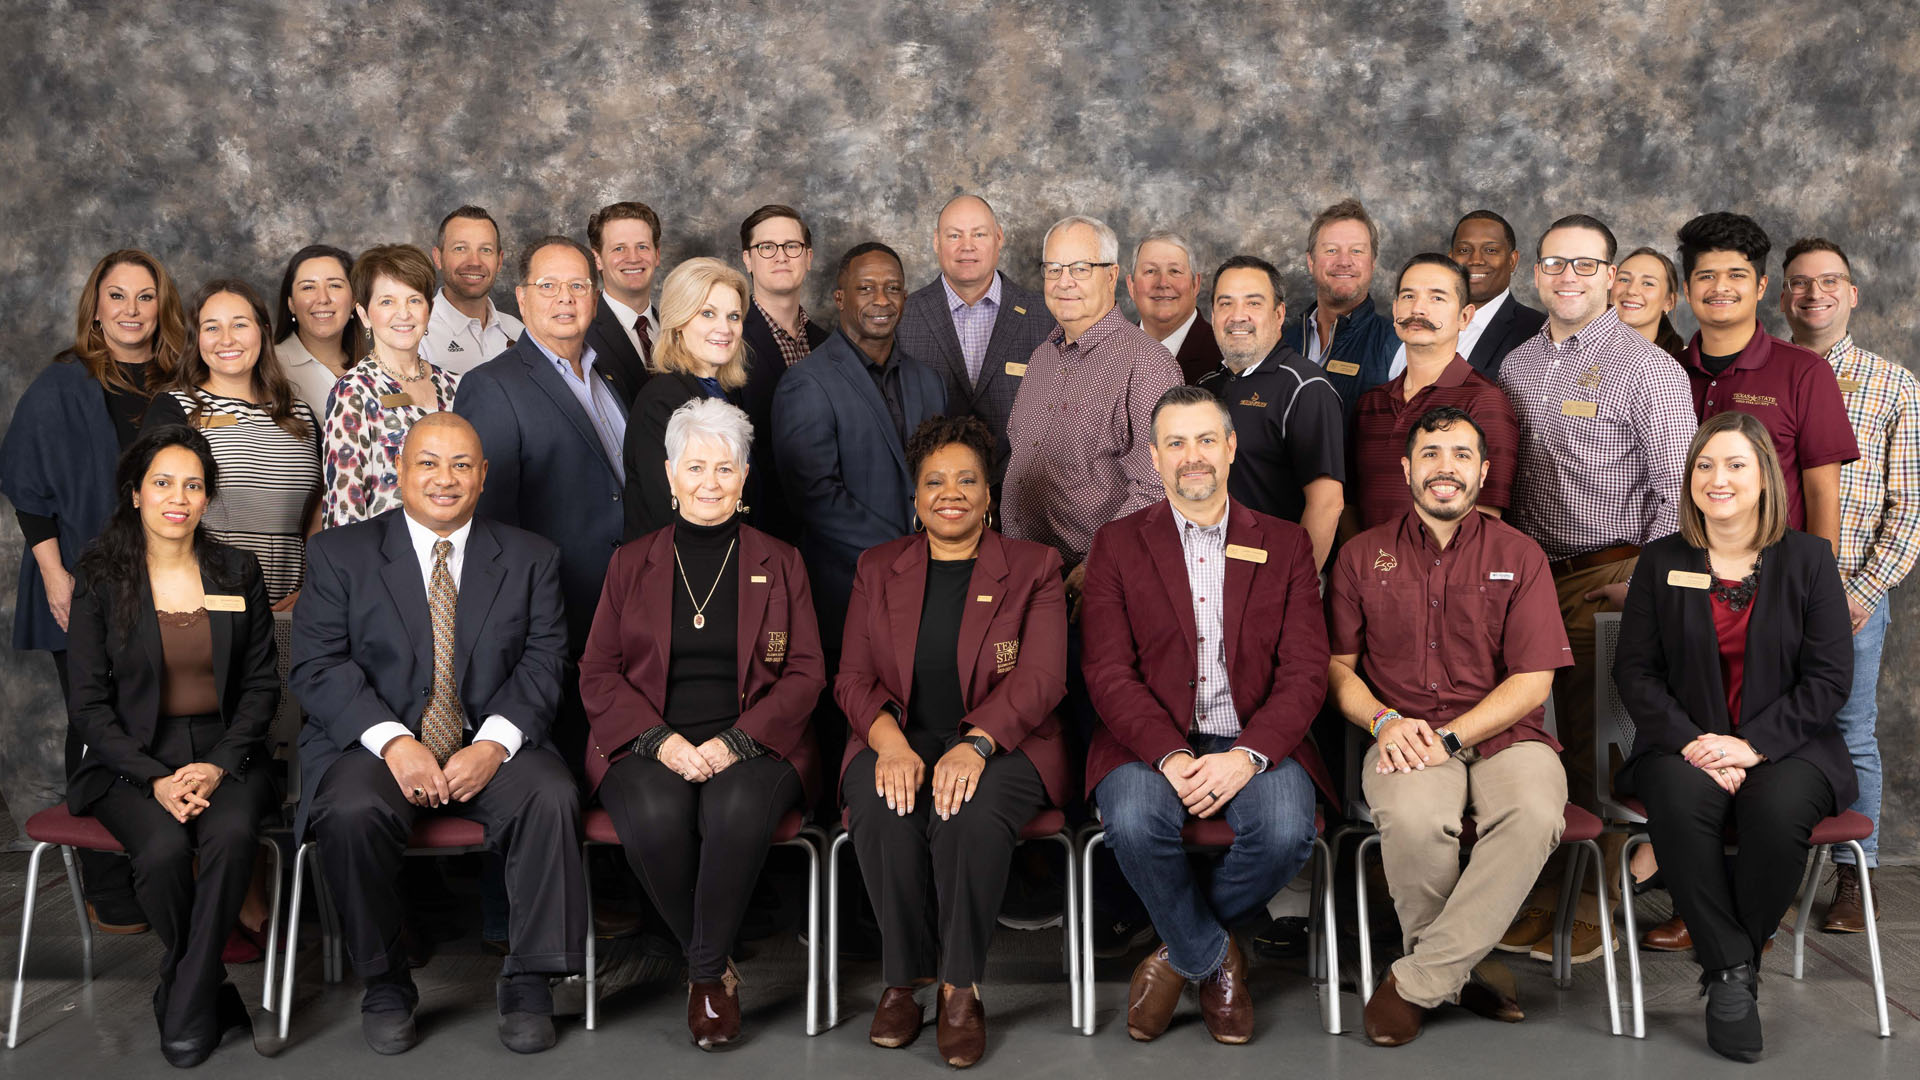 Group photo of board of directors against a grey background.